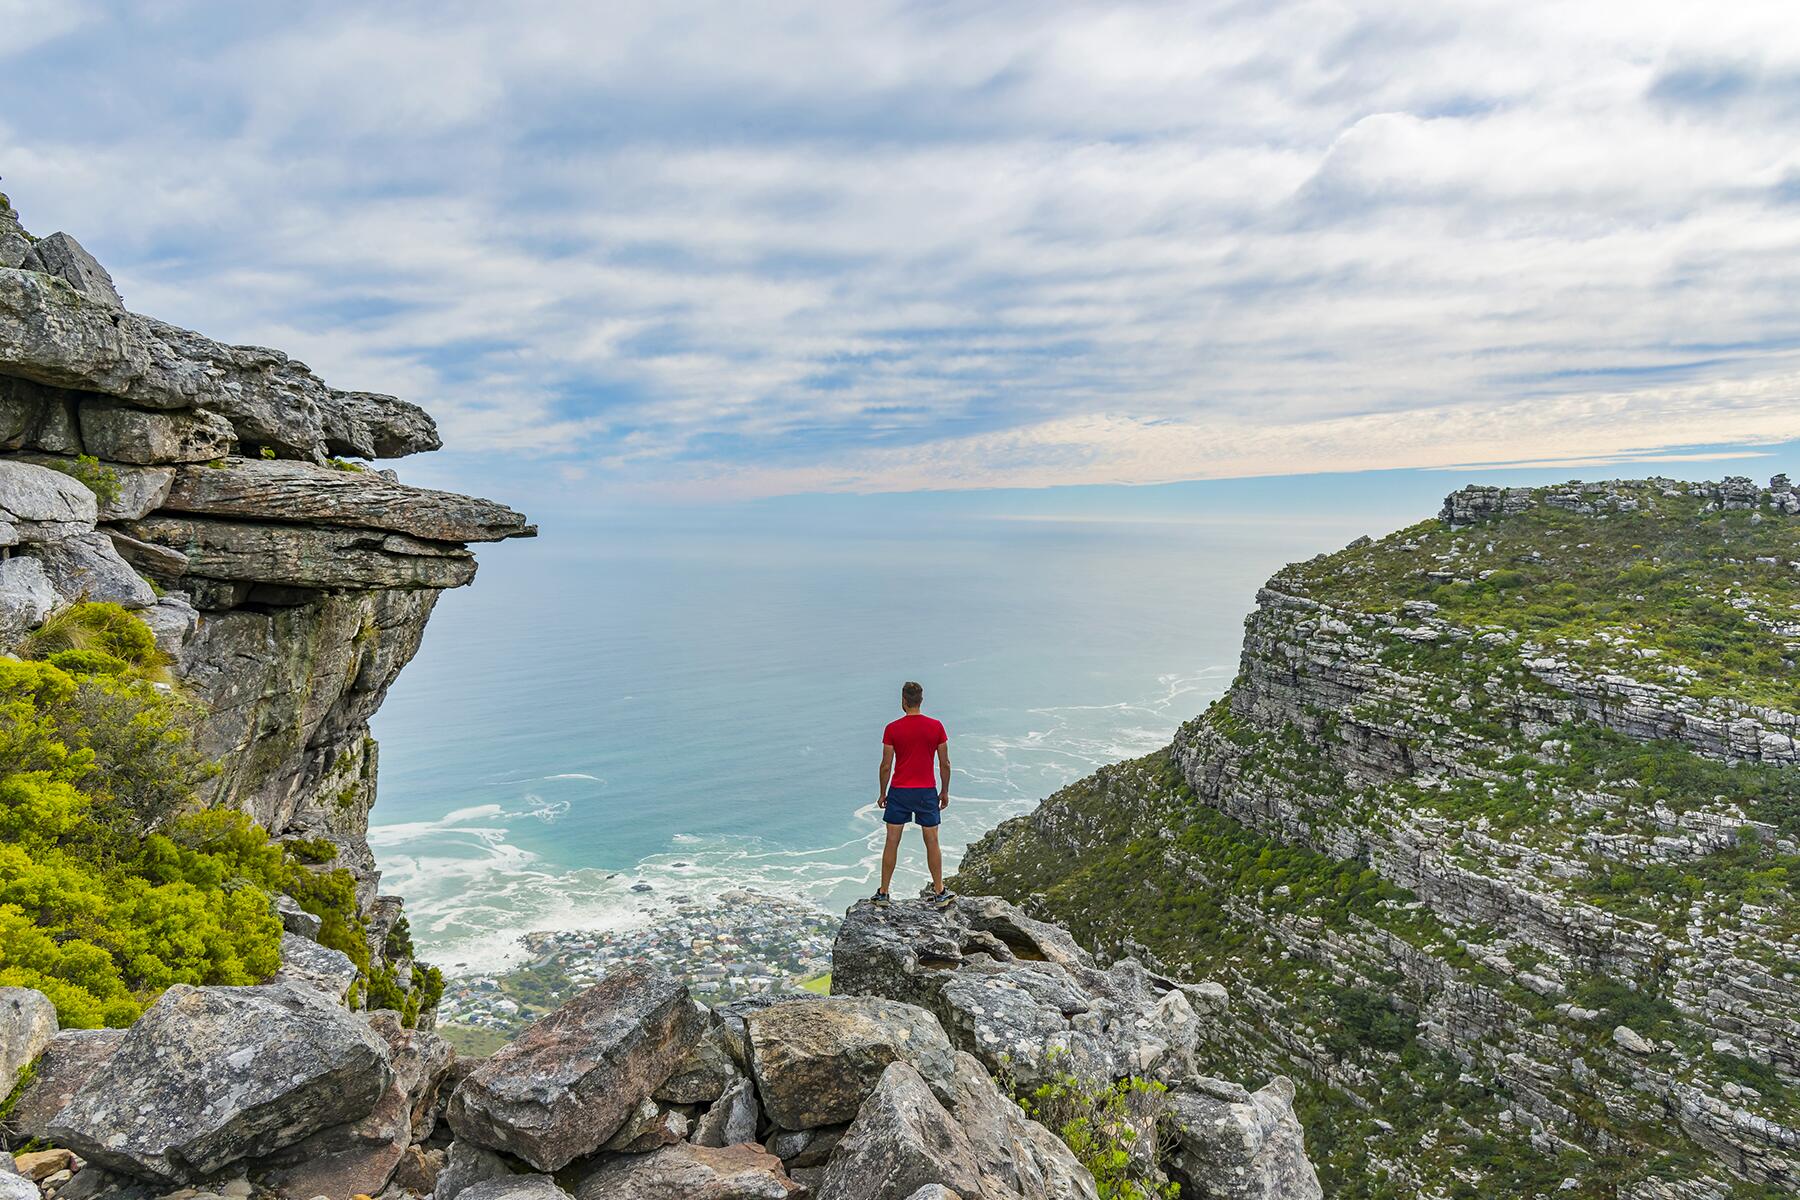 <a href='https://www.fodors.com/world/africa-and-middle-east/south-africa/cape-town-and-peninsula/experiences/news/photos/table-mountain-101-everything-you-need-to-know-about-visiting-cape-towns-iconic-landmark#'>From &quot;Table Mountain 101: Everything You Need to Know About Visiting Cape Town's Iconic Landmark: What's the Best Thing to Do While There?&quot;</a>